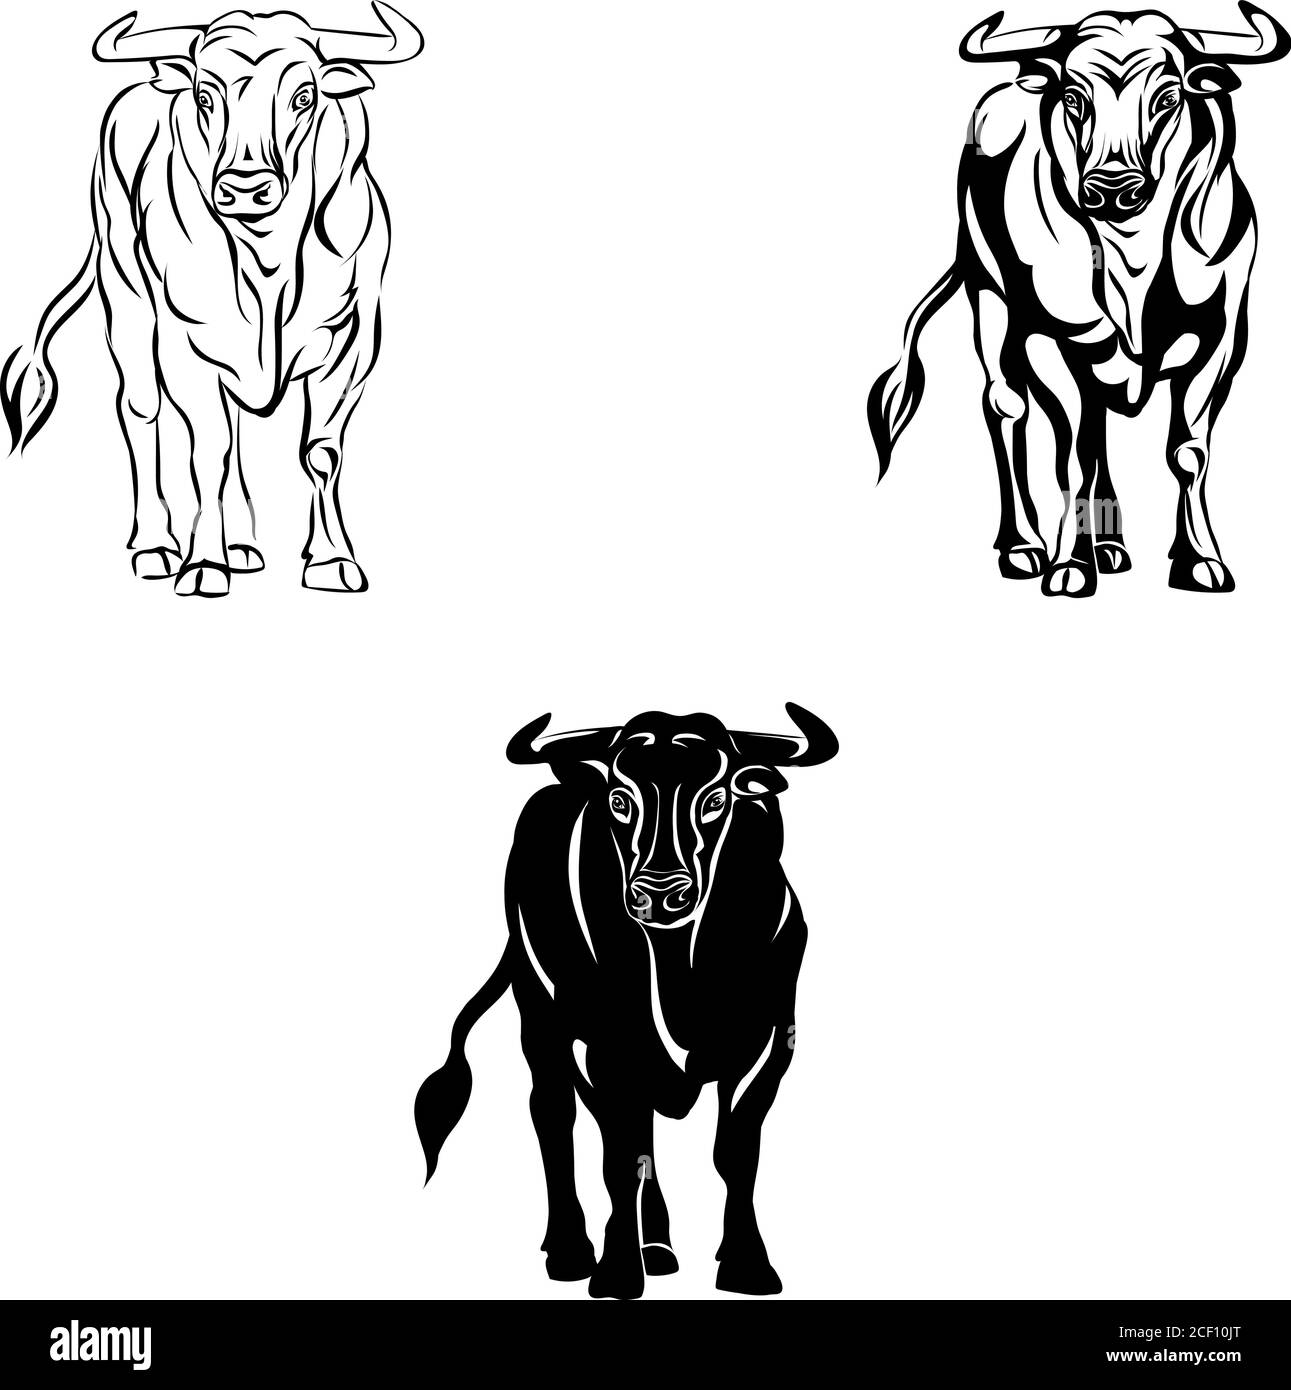 bull, portrait, head, color, vector, animal, illustration, icon, isolated, cow, wild, horned, white, black, art, symbol, sign, angry, power, farm Stock Vector